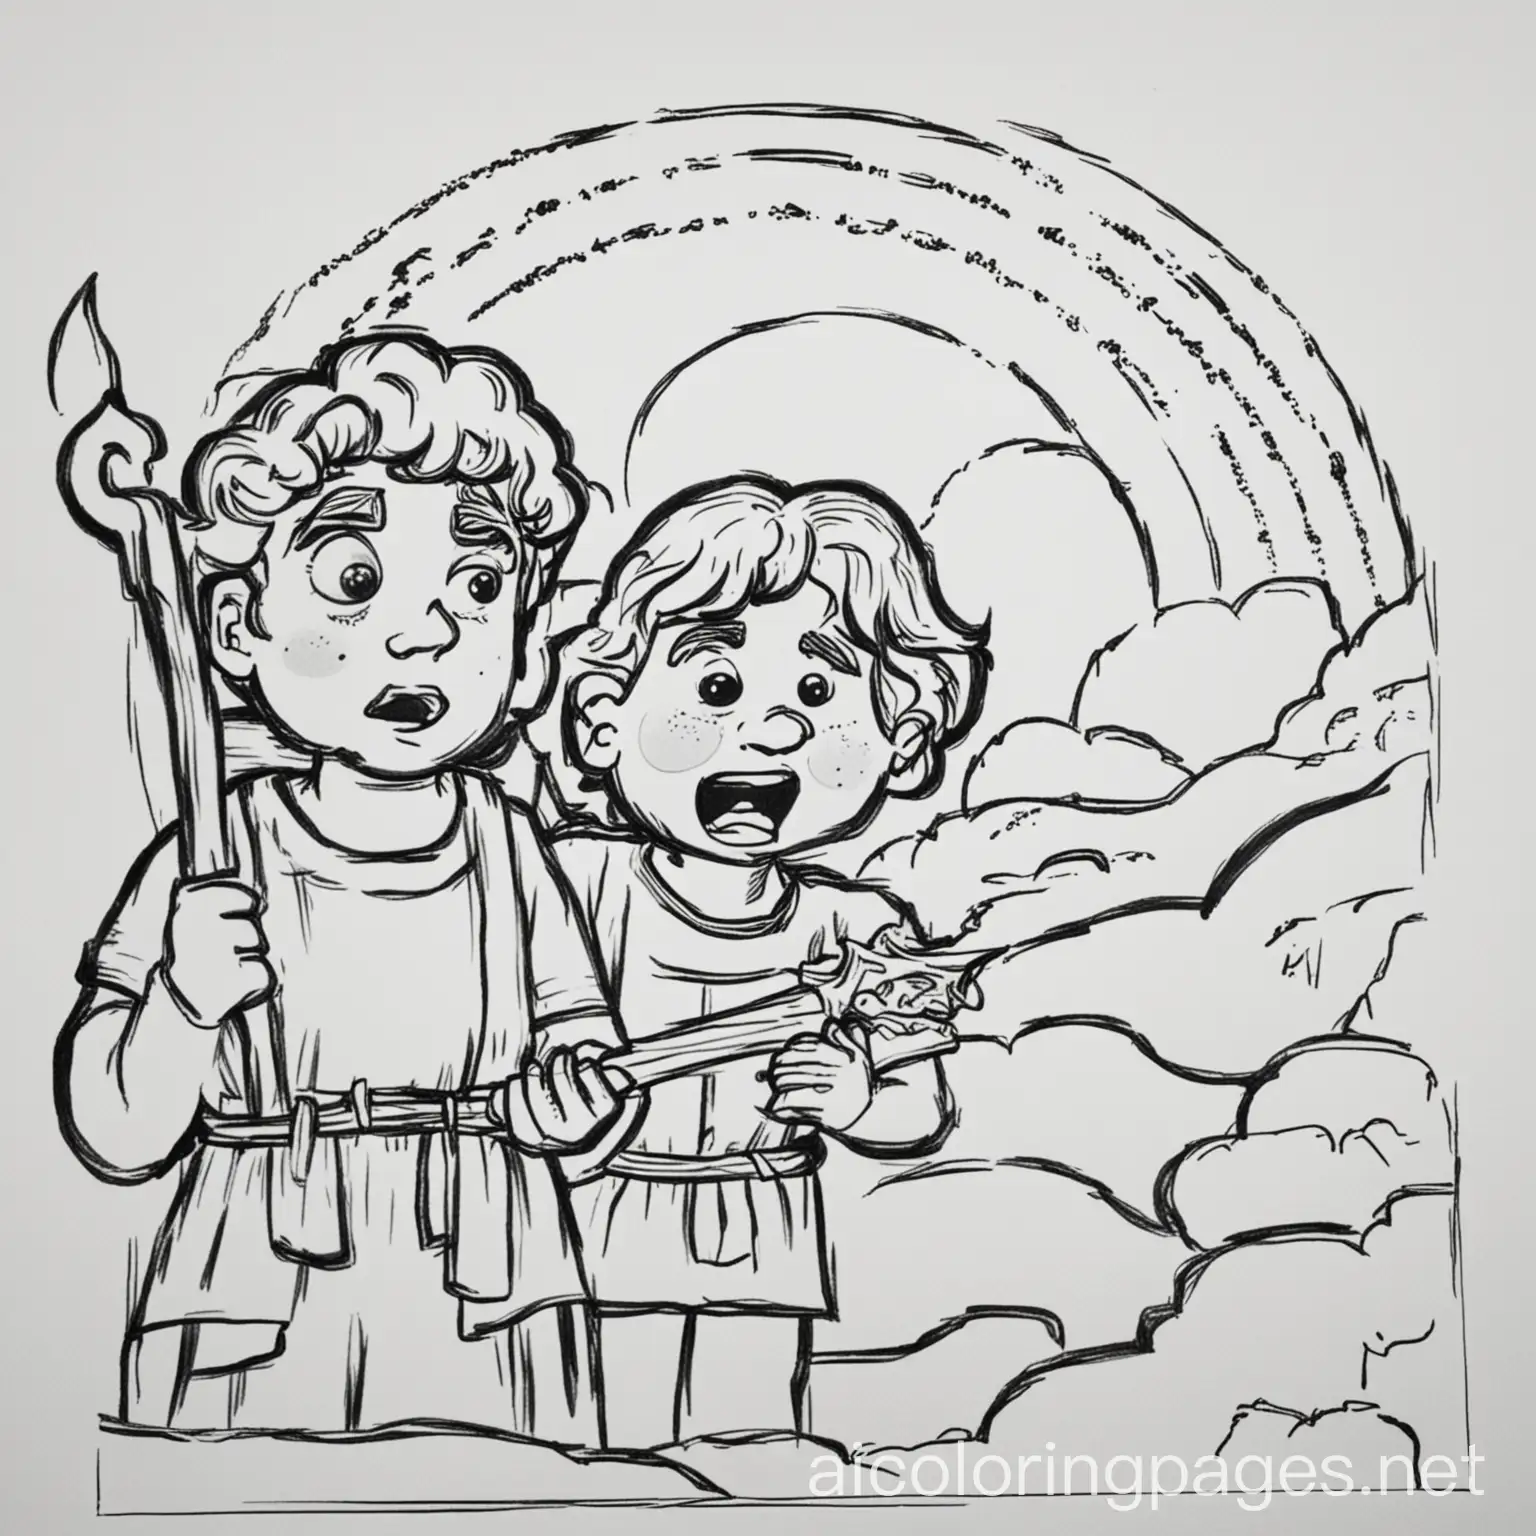 Cain and Abel in the Bible, Coloring Page, black and white, line art, white background, Simplicity, Ample White Space. The background of the coloring page is plain white to make it easy for young children to color within the lines. The outlines of all the subjects are easy to distinguish, making it simple for kids to color without too much difficulty